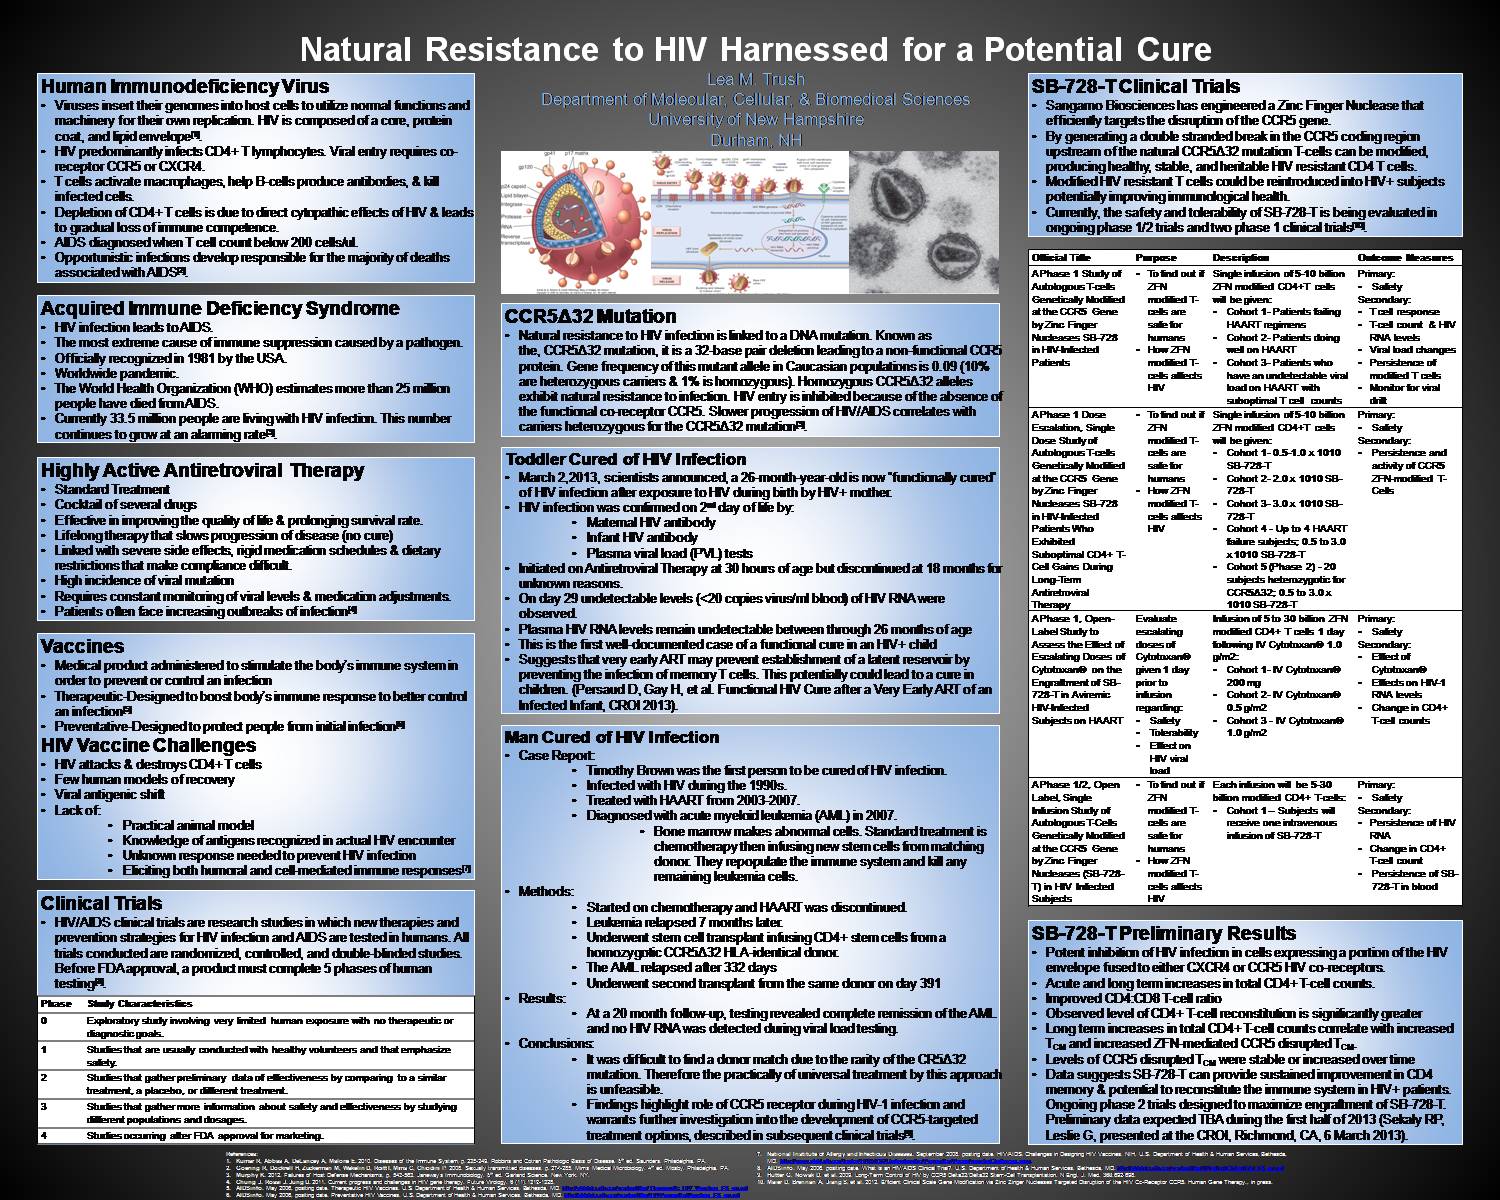 Natural Resistance To Hiv Harnessed For A Potential Cure by lmr64